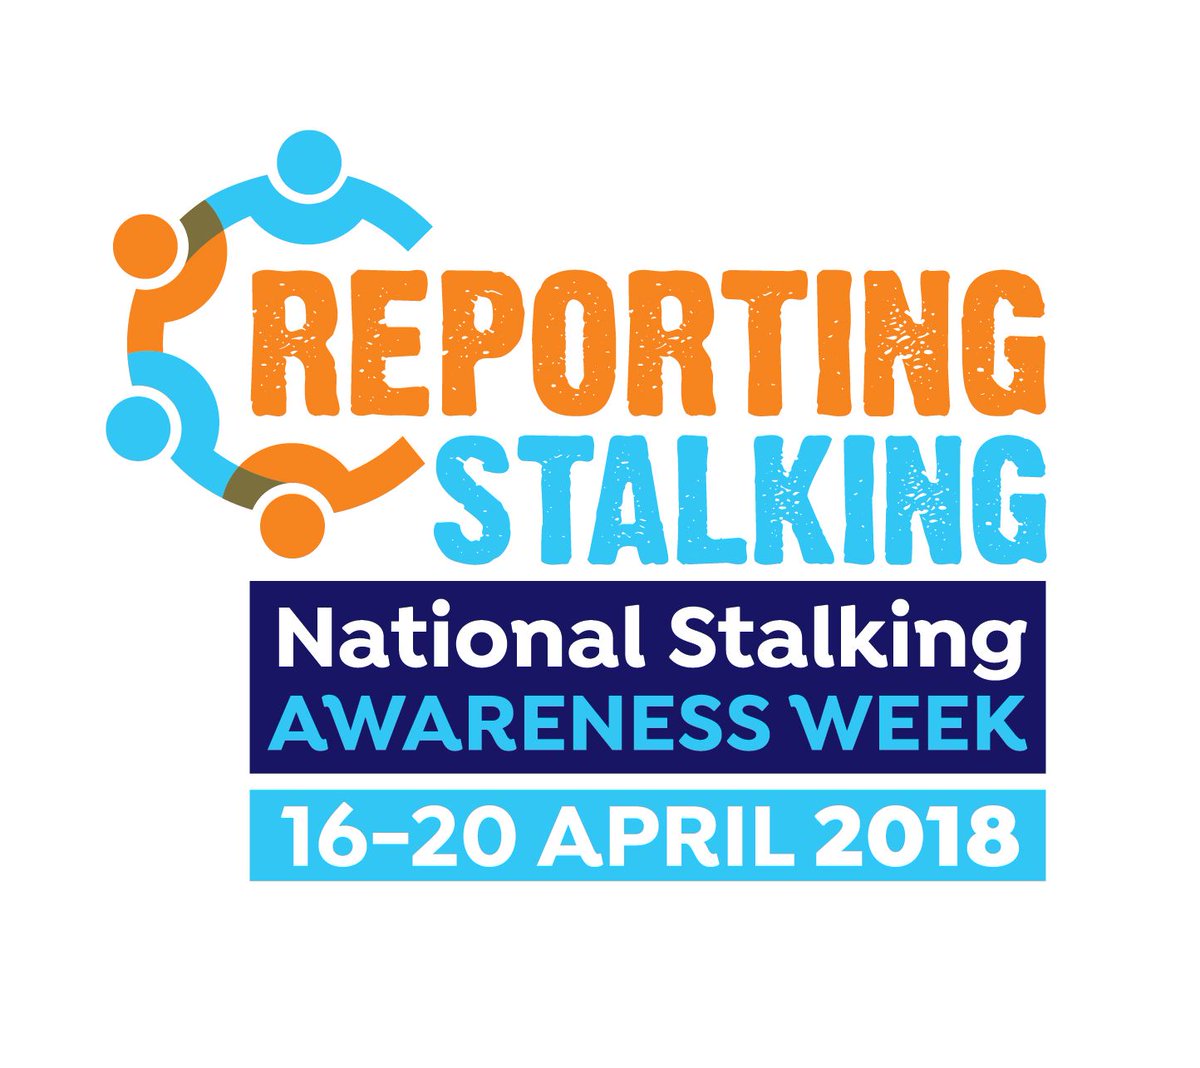 This National Stalking Awareness Week, our team at #Plymouth Domestic Abuse Service is on hand to talk to anyone experiencing #stalking sanctuary-supported-living.co.uk/pdas #ReportingStalking #stalking #NSAW2018 @DC_Police @StalkingUK